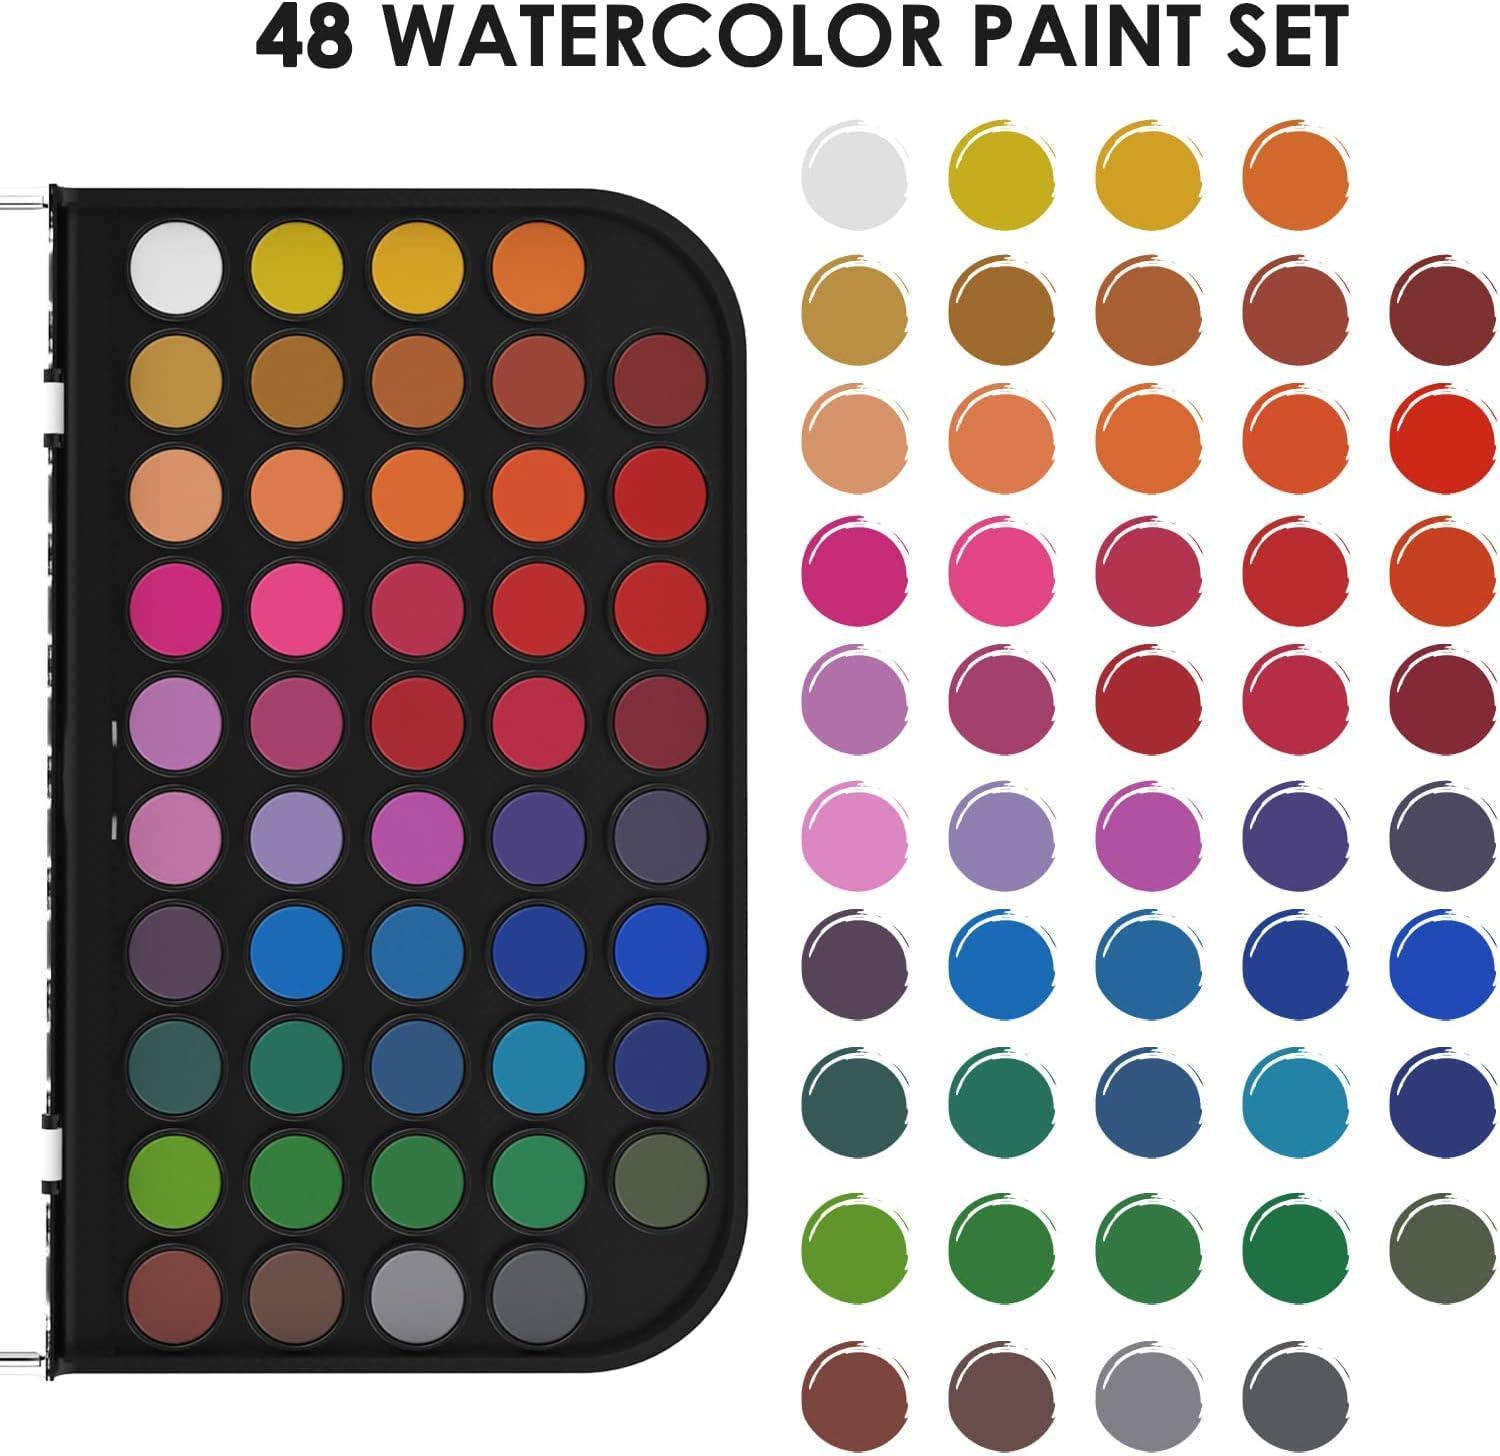 Artecho Watercolor Paint Set 50 Colors in Metal Box with 50 colors, 50